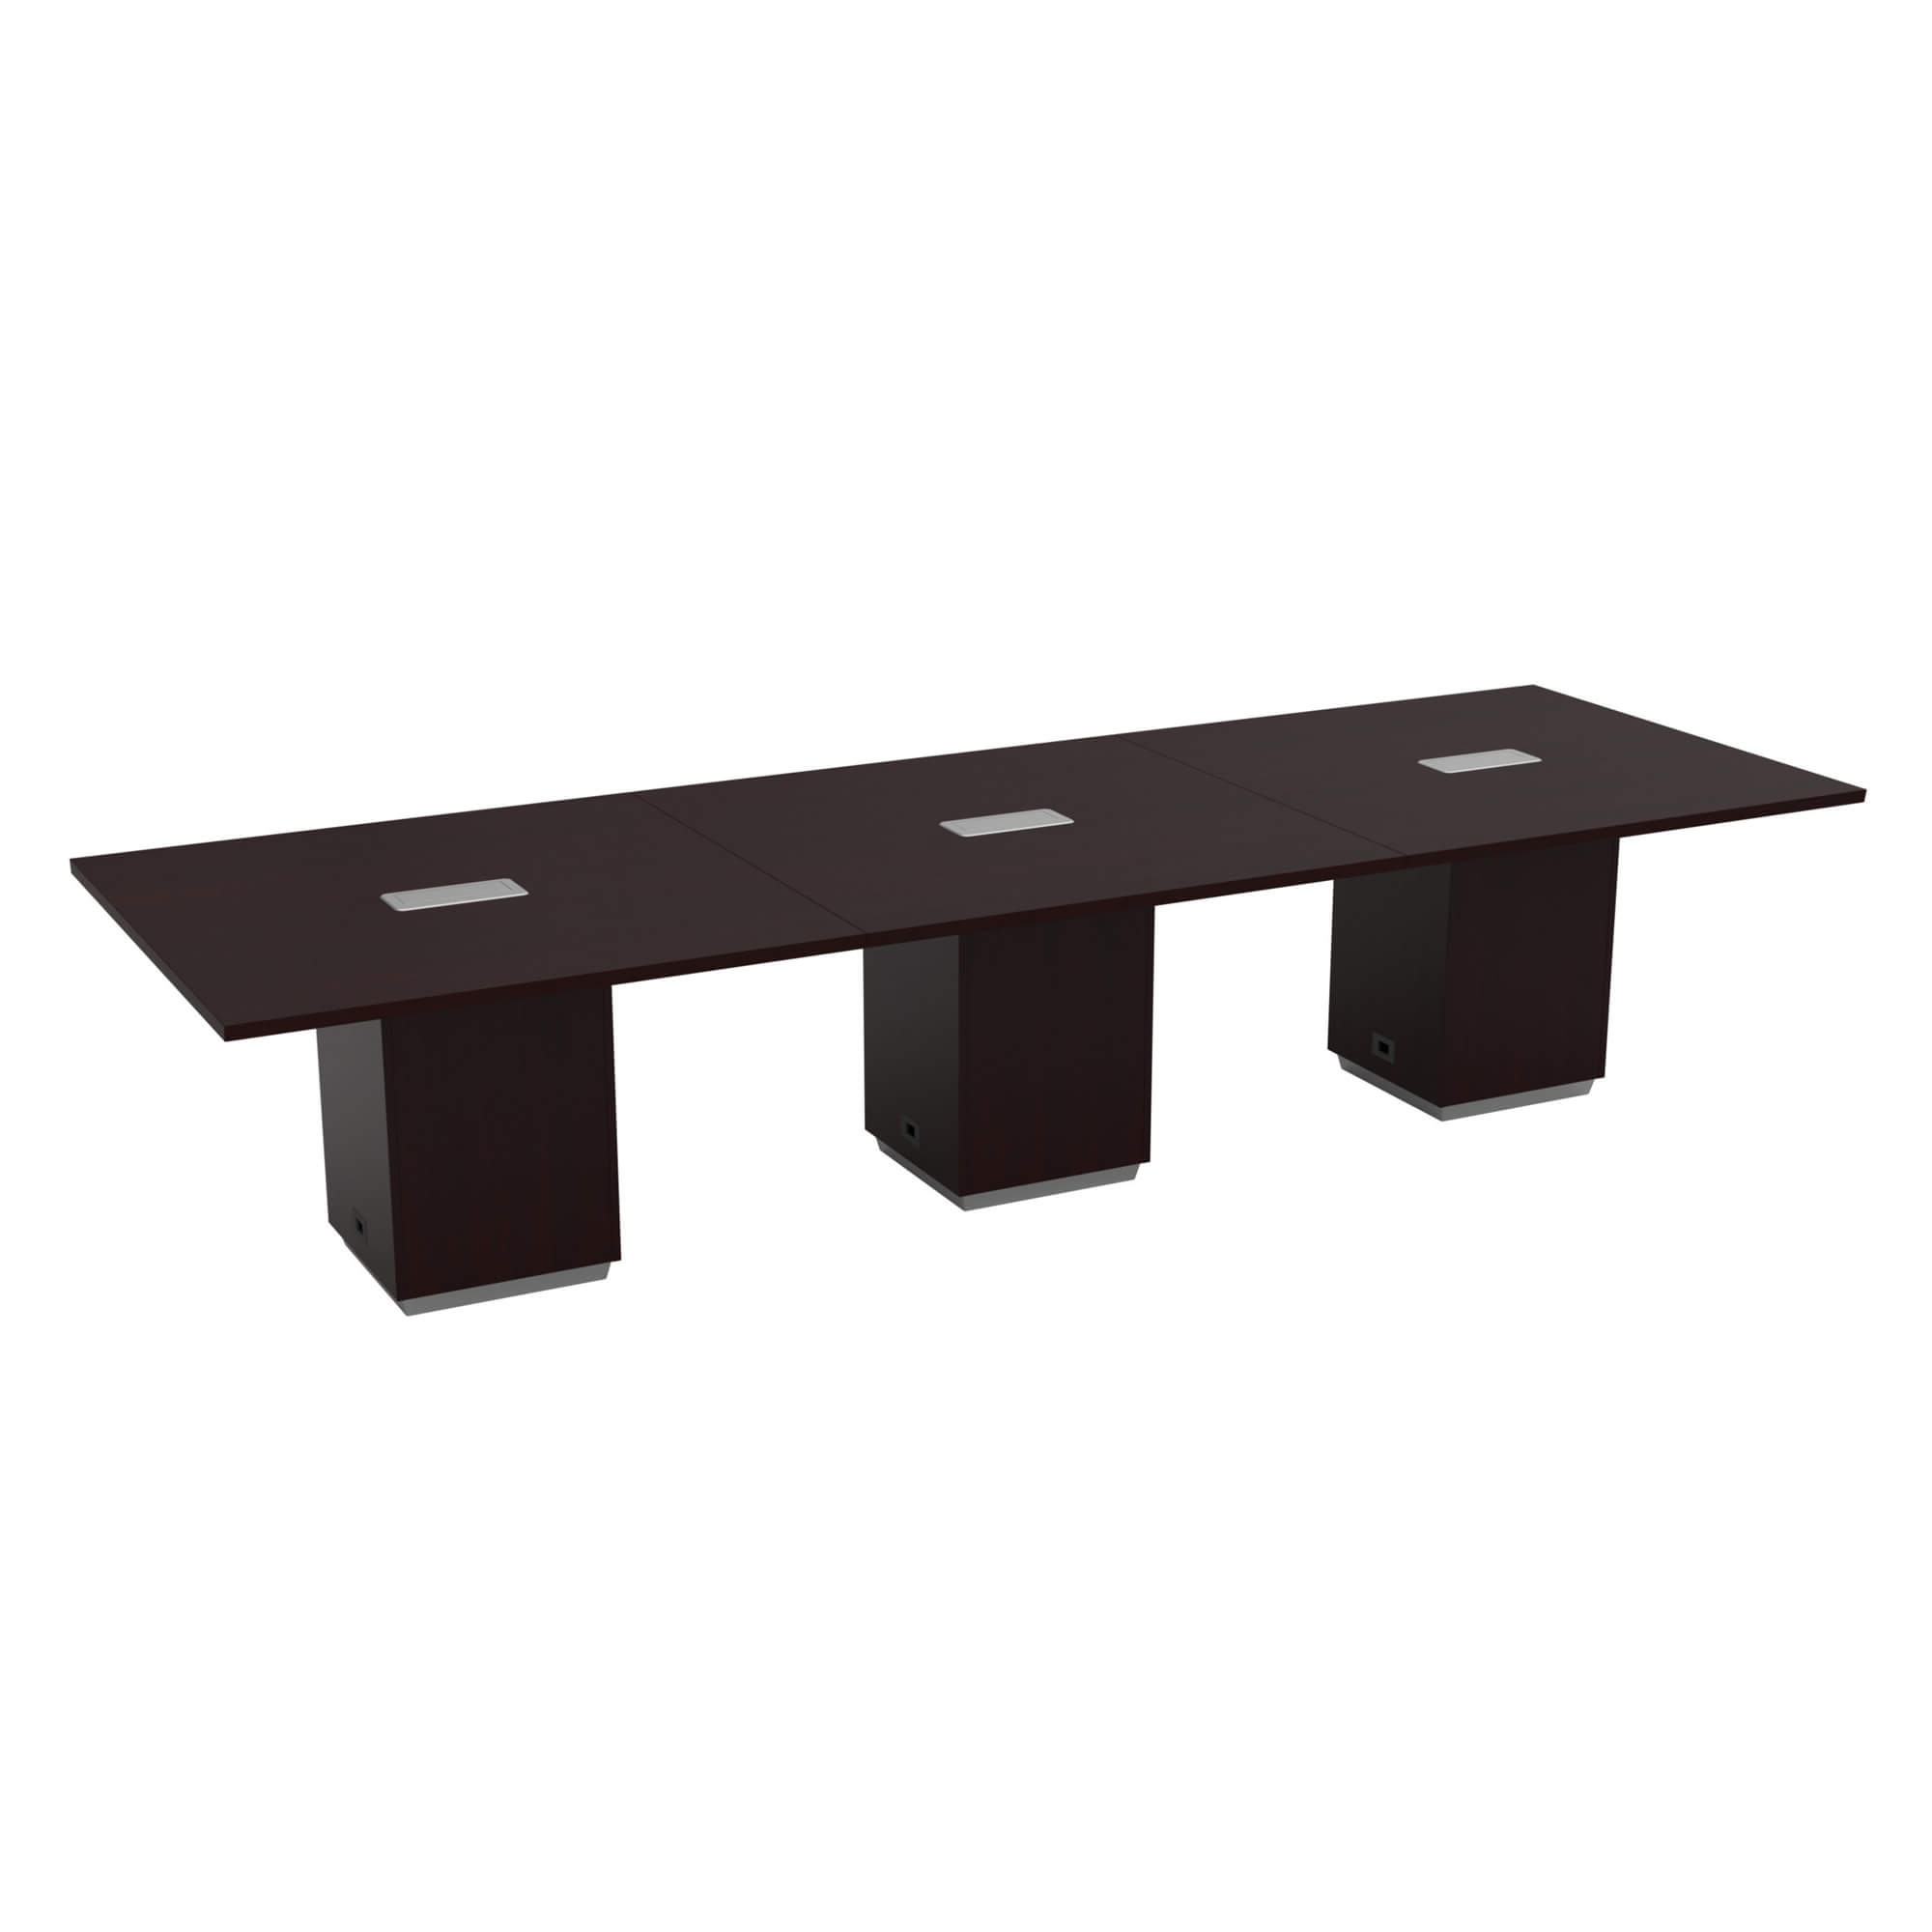 Conference tables CUB TUXDKR 62 PSO 1